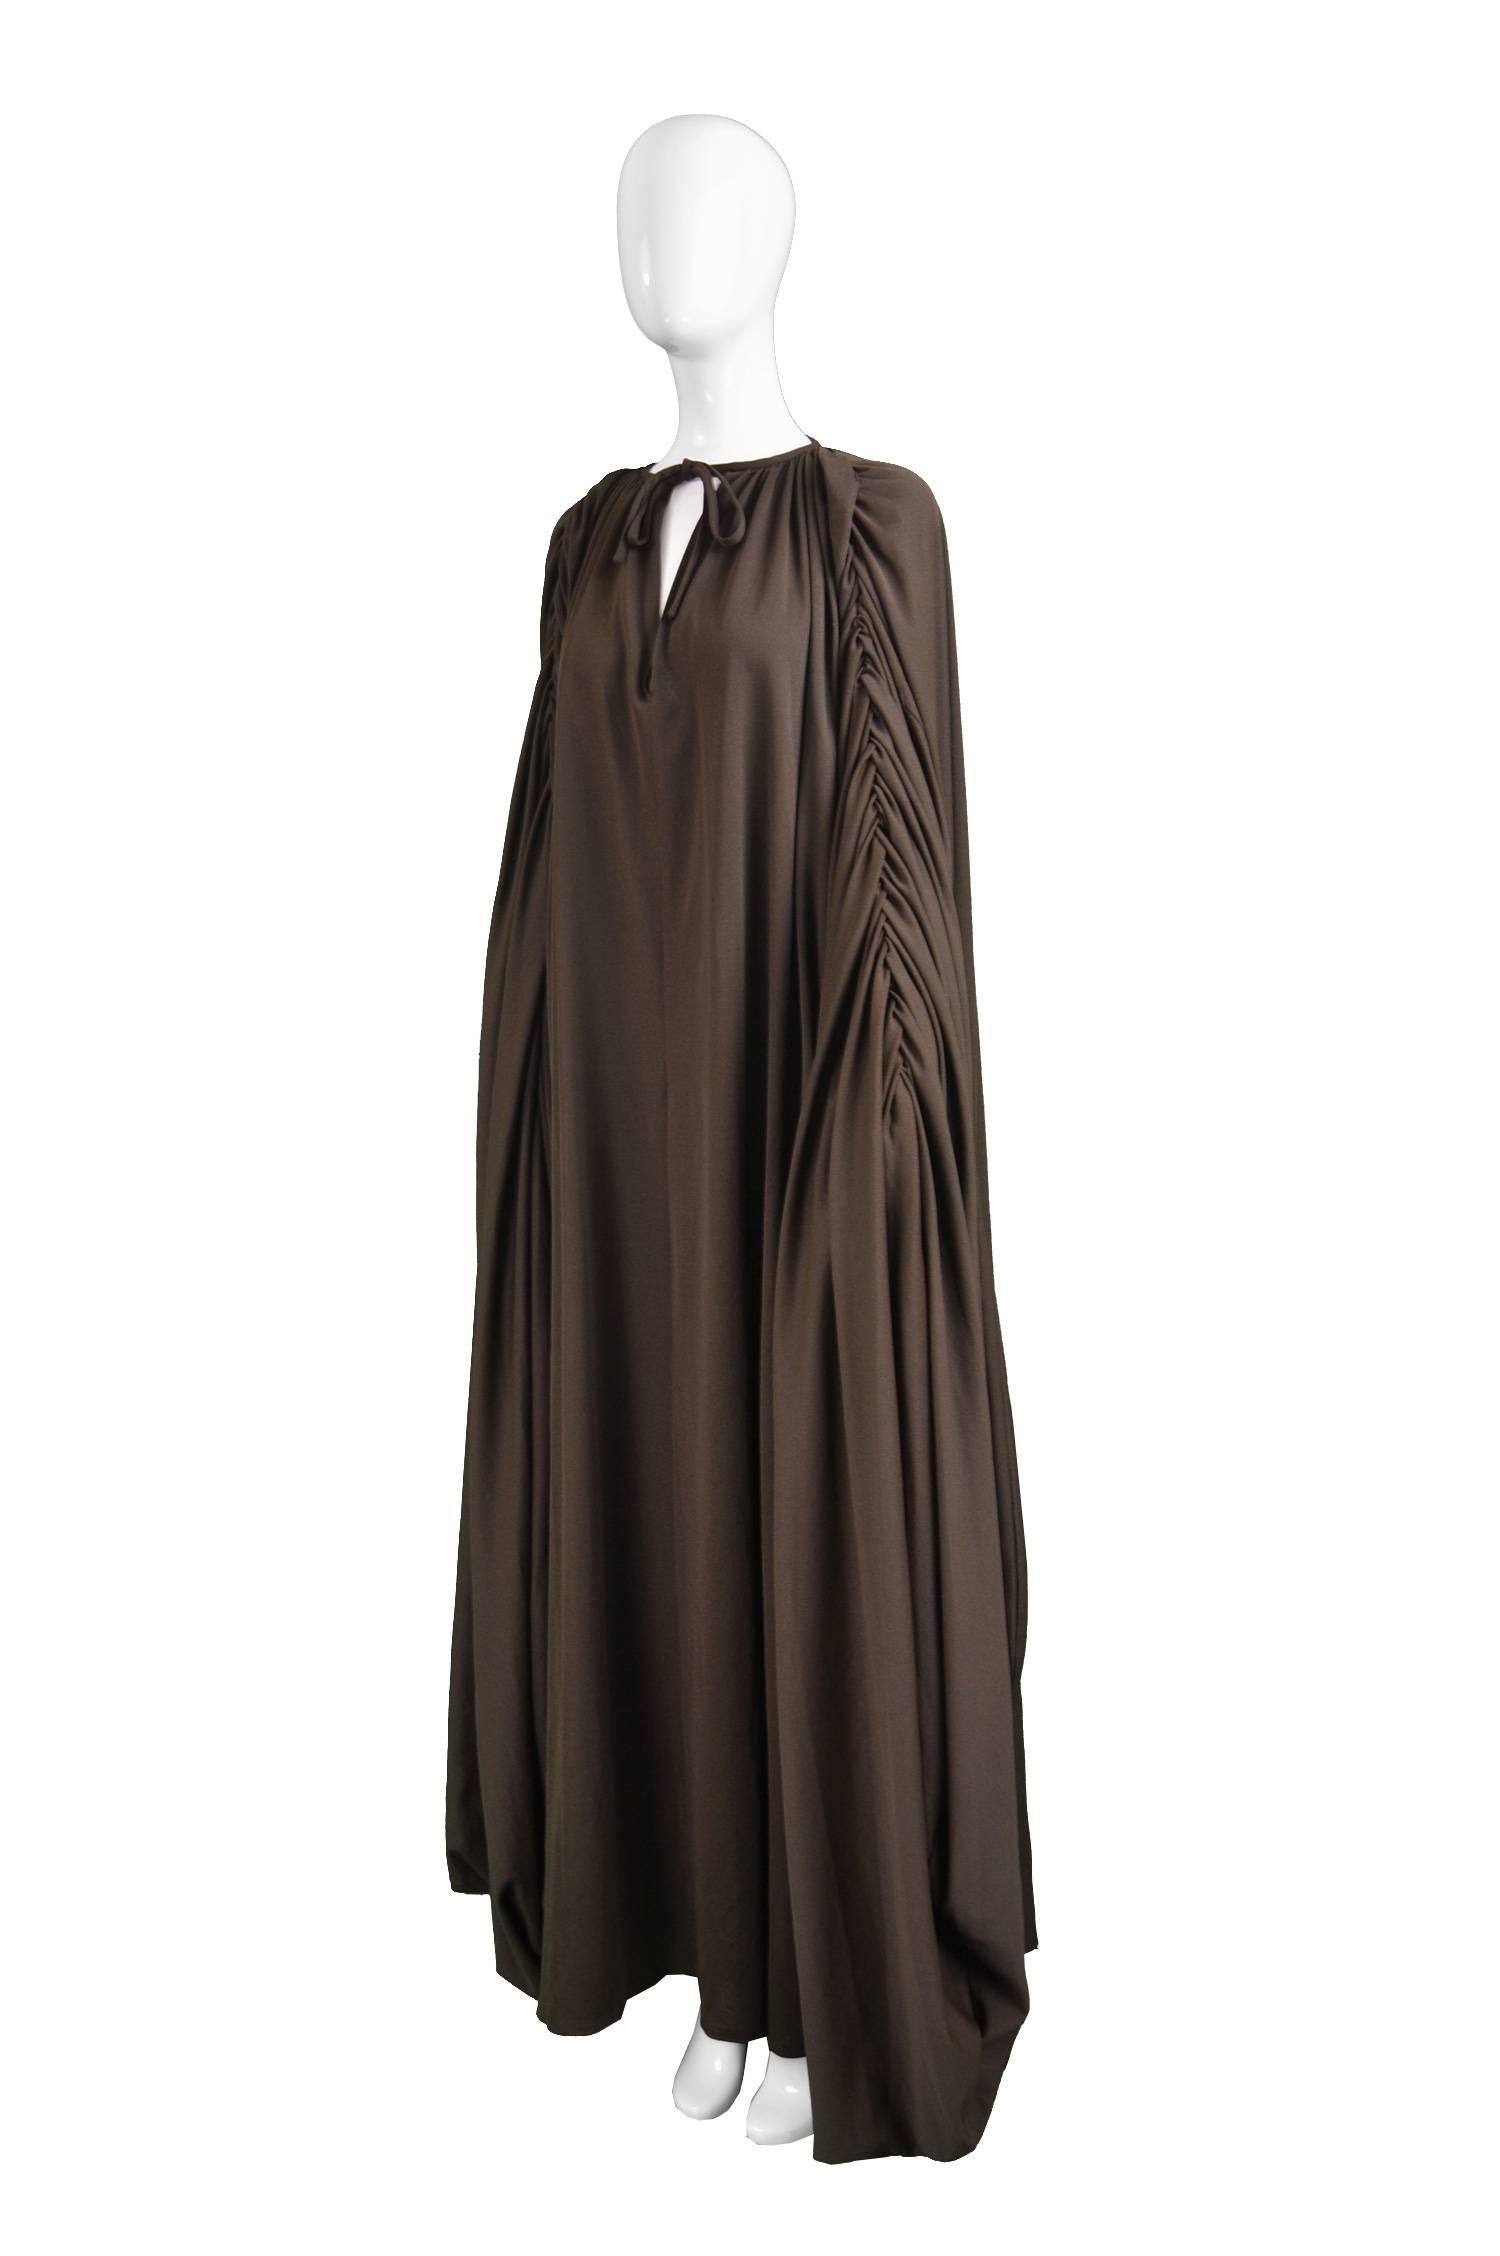 Vintage 1970s Kimono Style Brown Maxi Dress with Huge Dramatic Sleeves 2